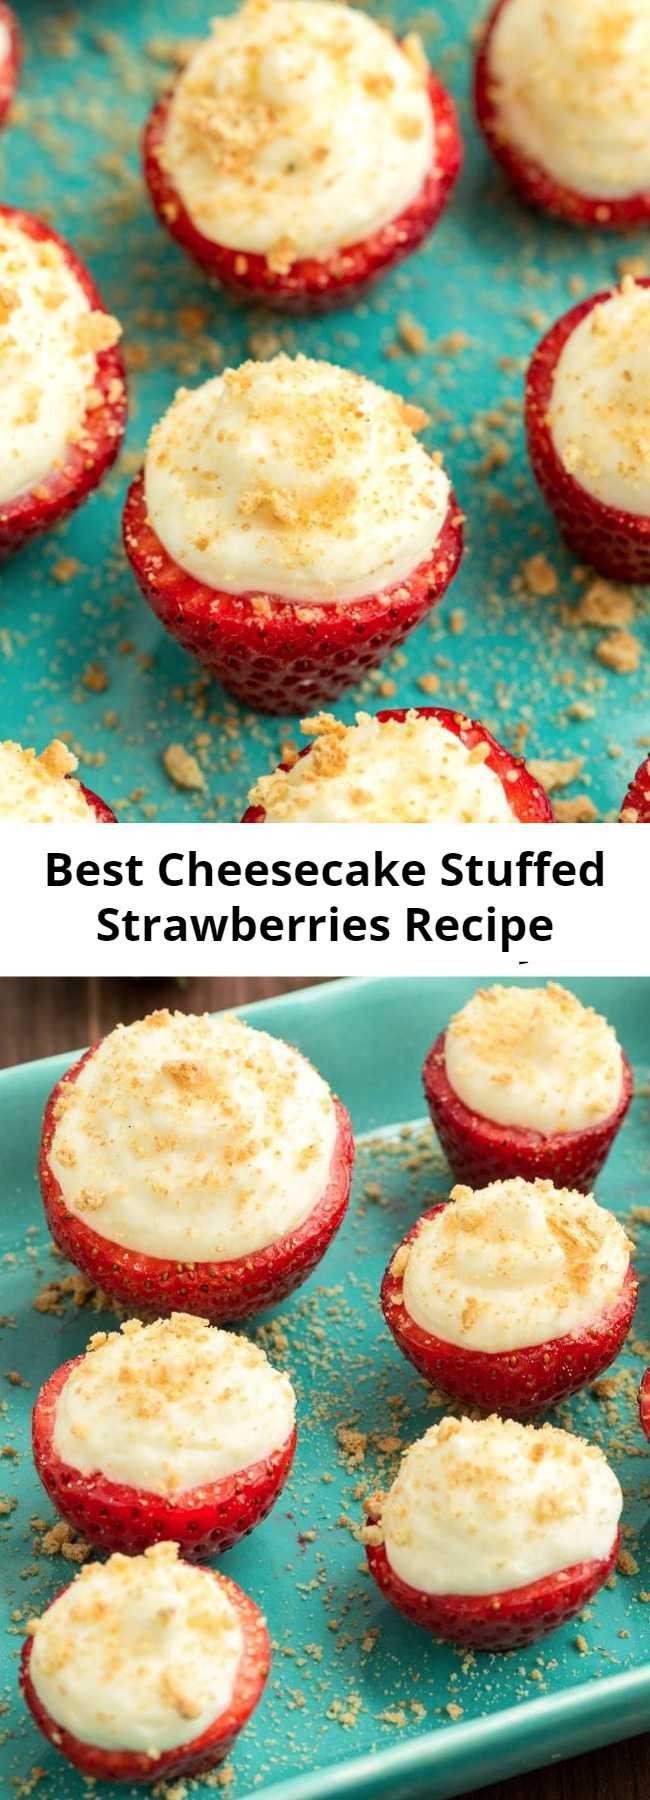 Best Cheesecake Stuffed Strawberries Recipe - Looking for easy dessert ideas? This fun and fruity dessert is the perfect no-bake treat.